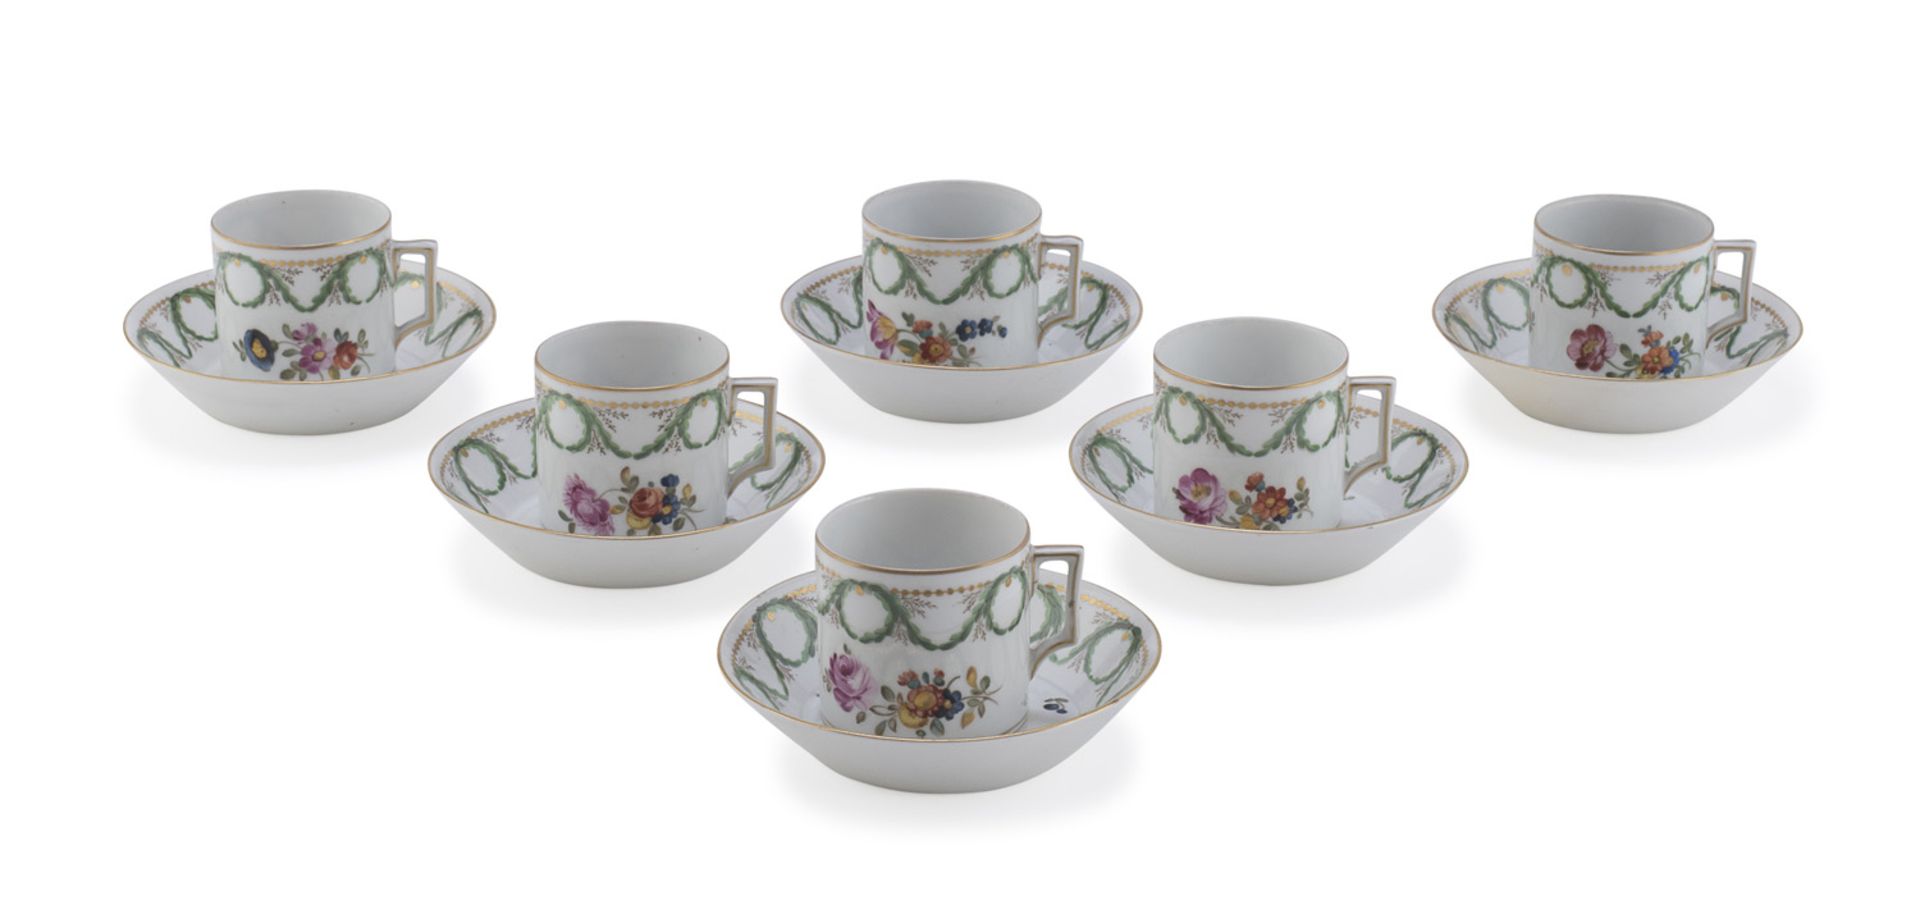 SIX PORCELAIN CUPS WITH SAUCERS VIENNA 19TH CENTURY